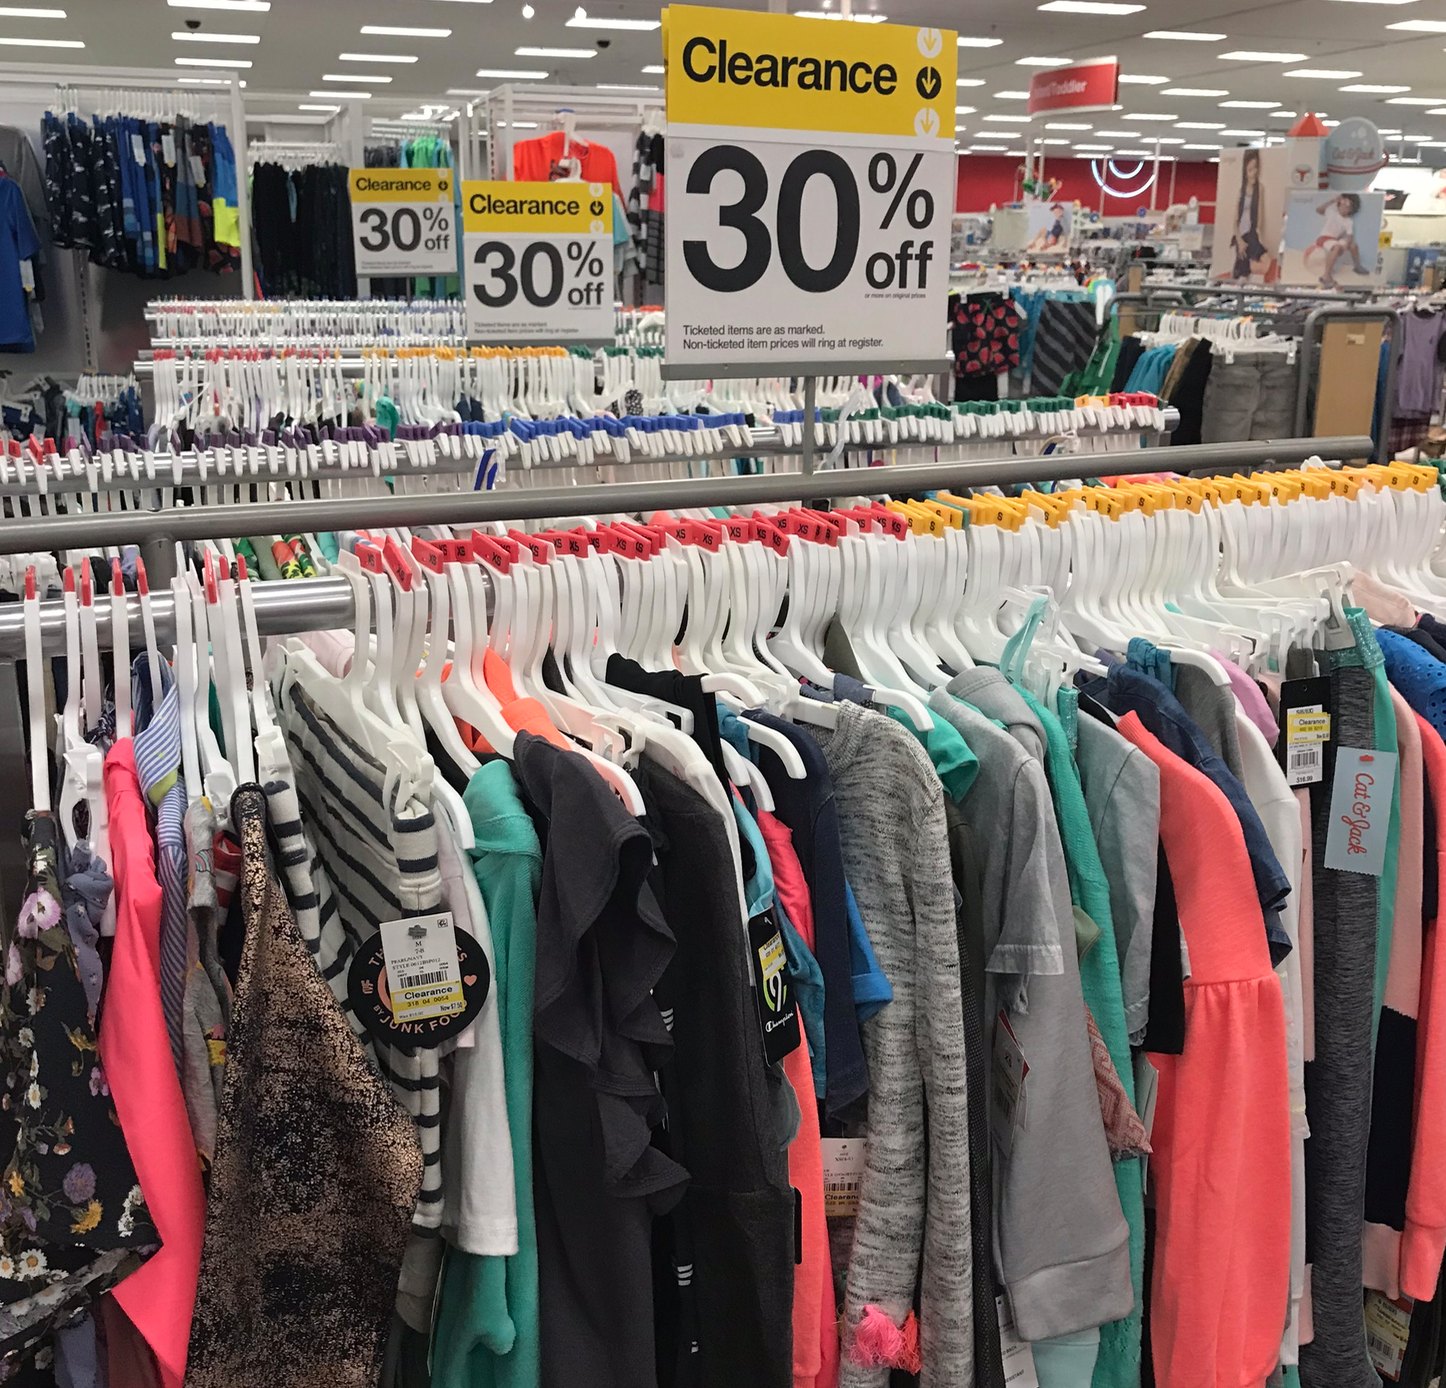 https://www.southernsavers.com/wp-content/uploads/2018/02/target-clearance-clothing.jpg